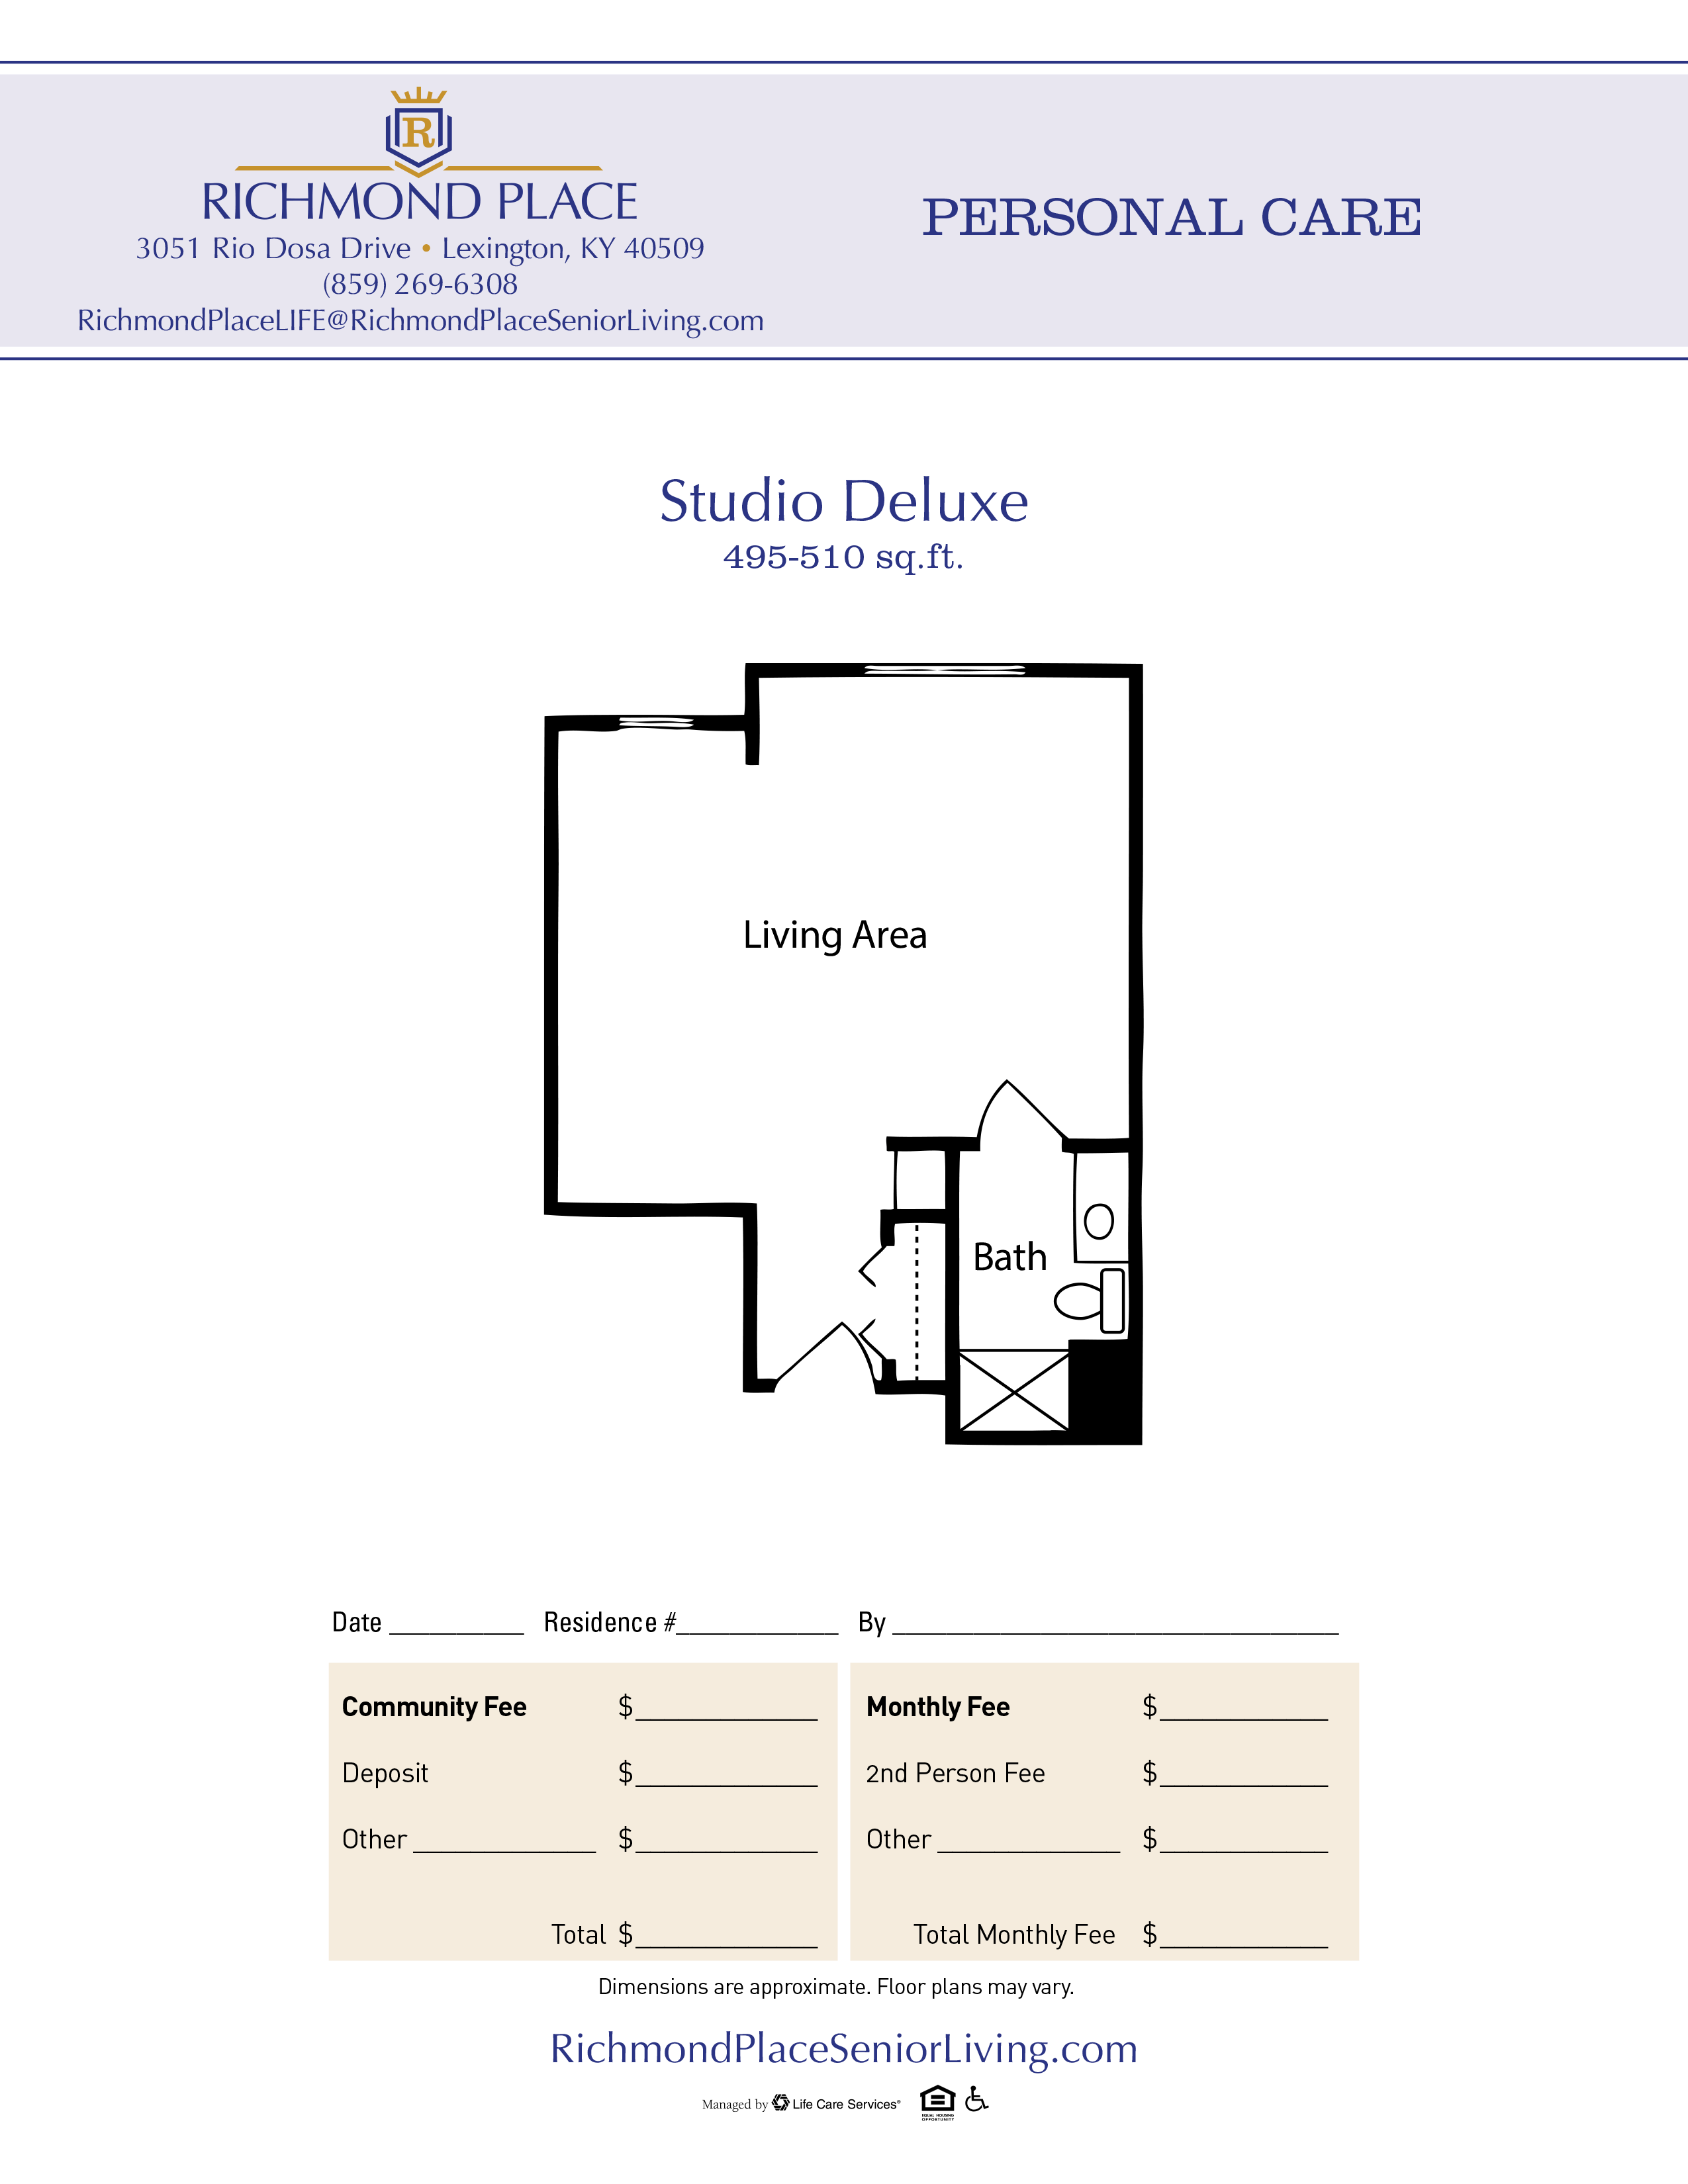 Floor plan for a Studio Deluxe unit, 495-510 sq.ft, at Richmond Place Personal Care.